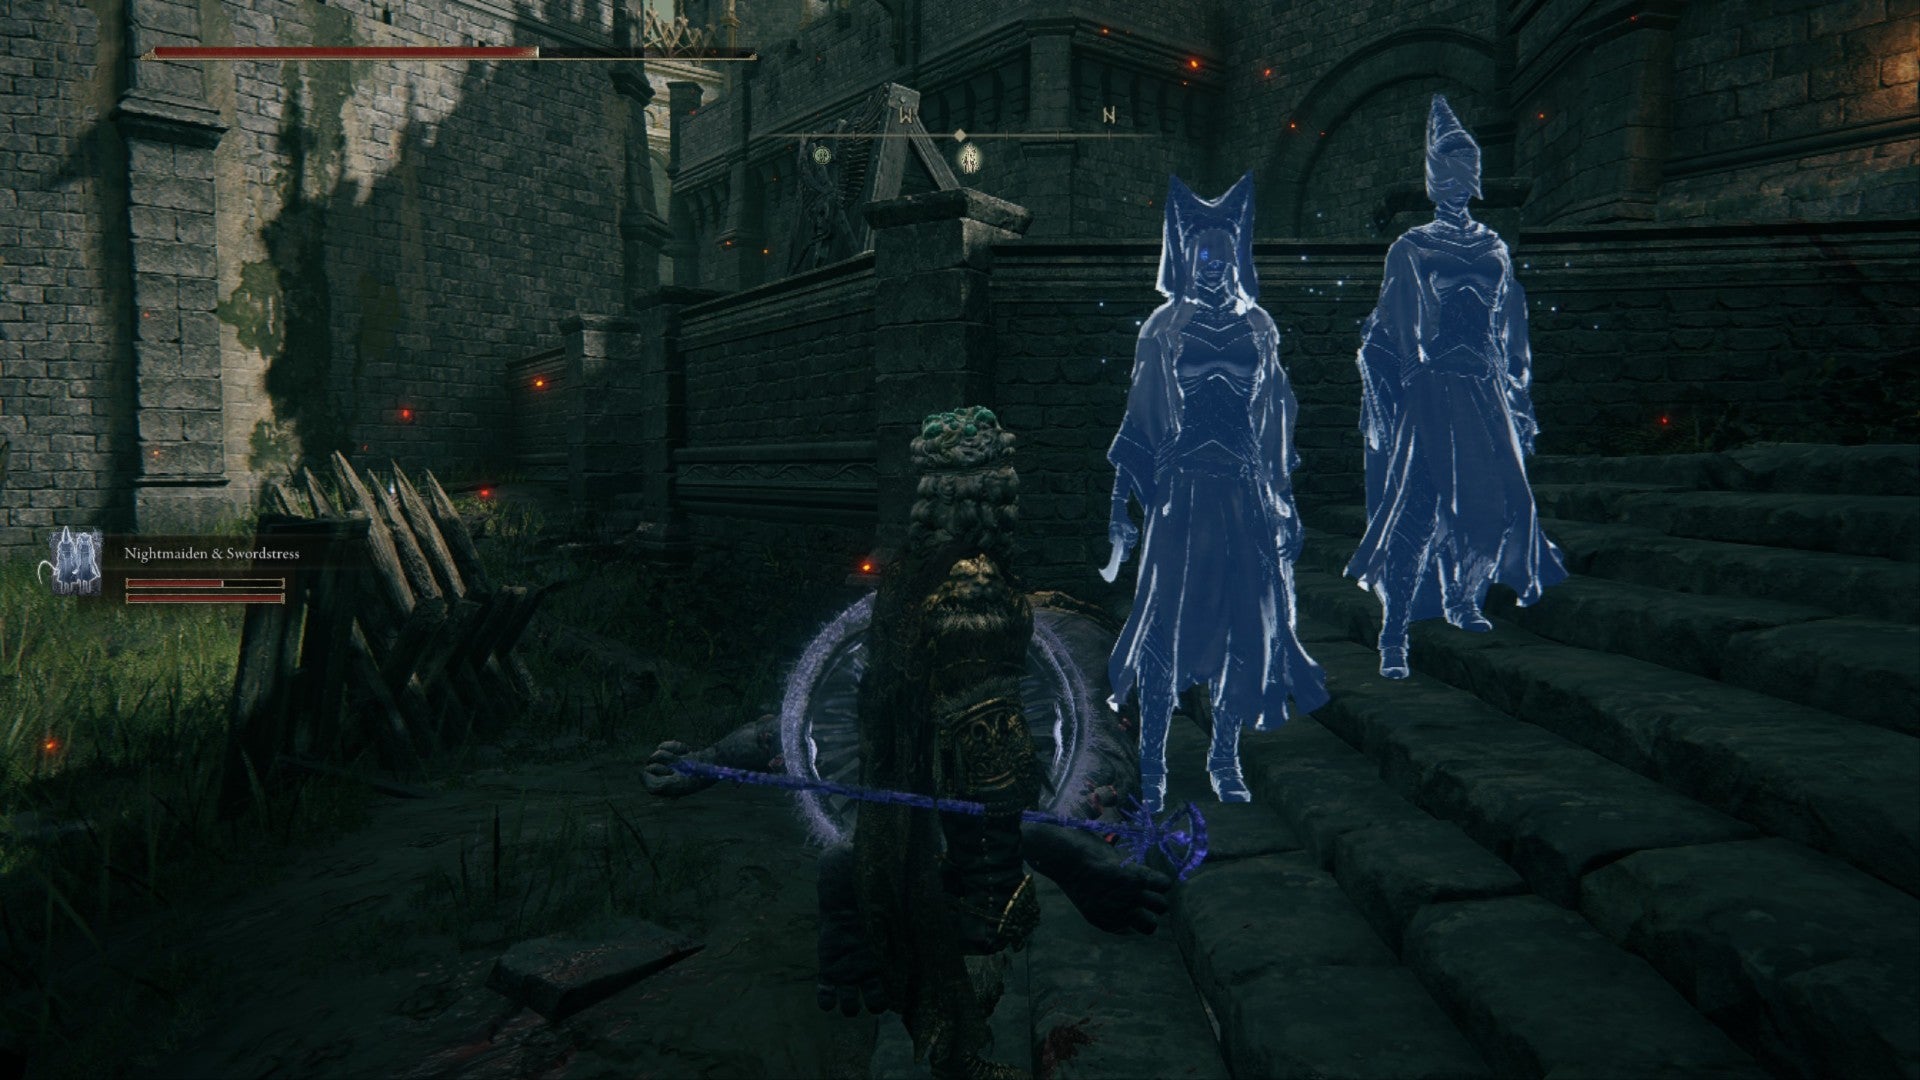 Elden Ring player stands with two blue apparitions known as the Nightmaiden and Swordstress Puppets